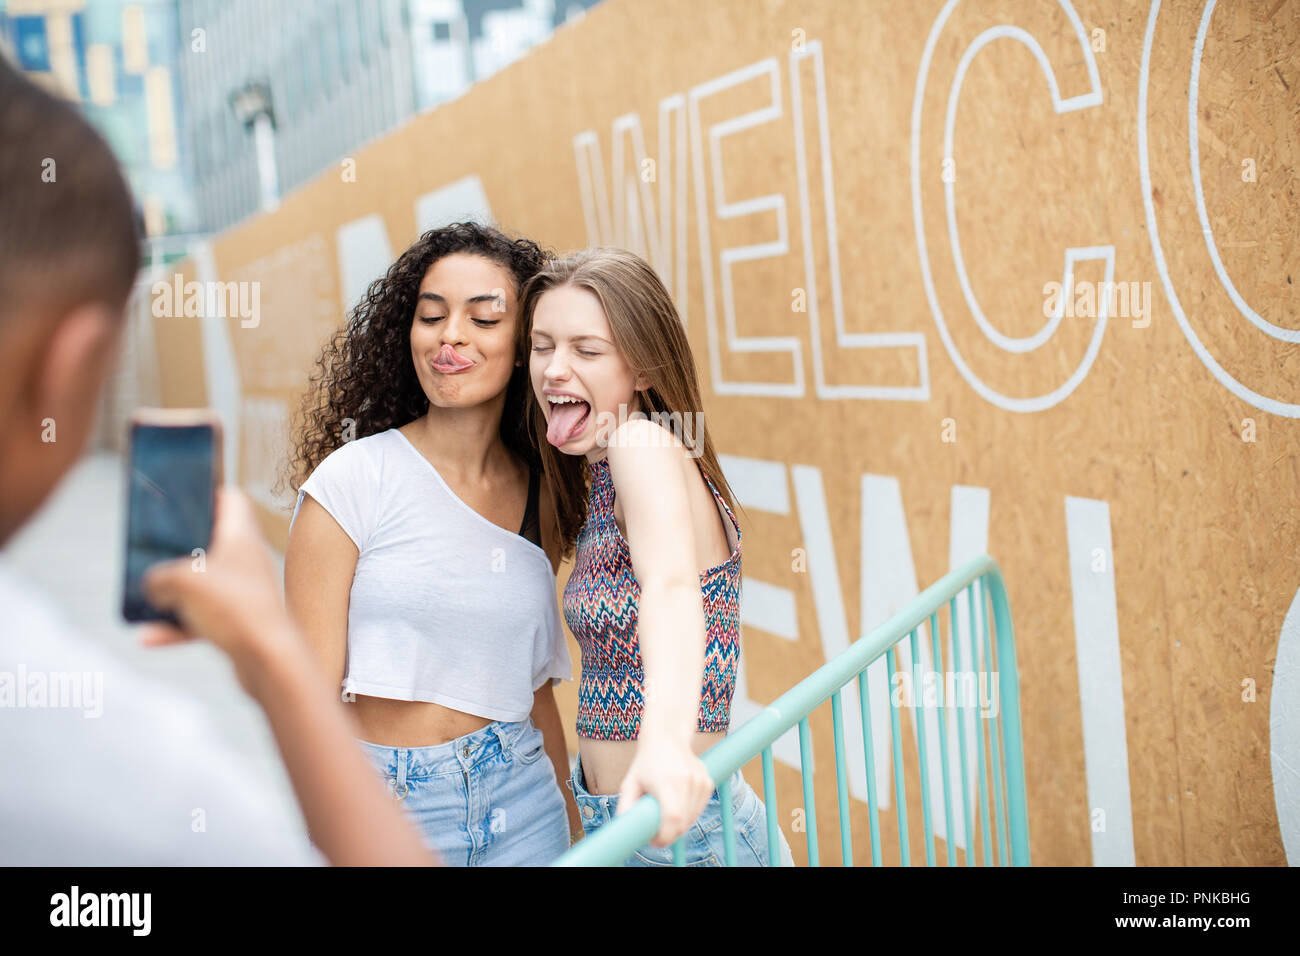 Teenagers posing for a smartphone photo Stock Photo